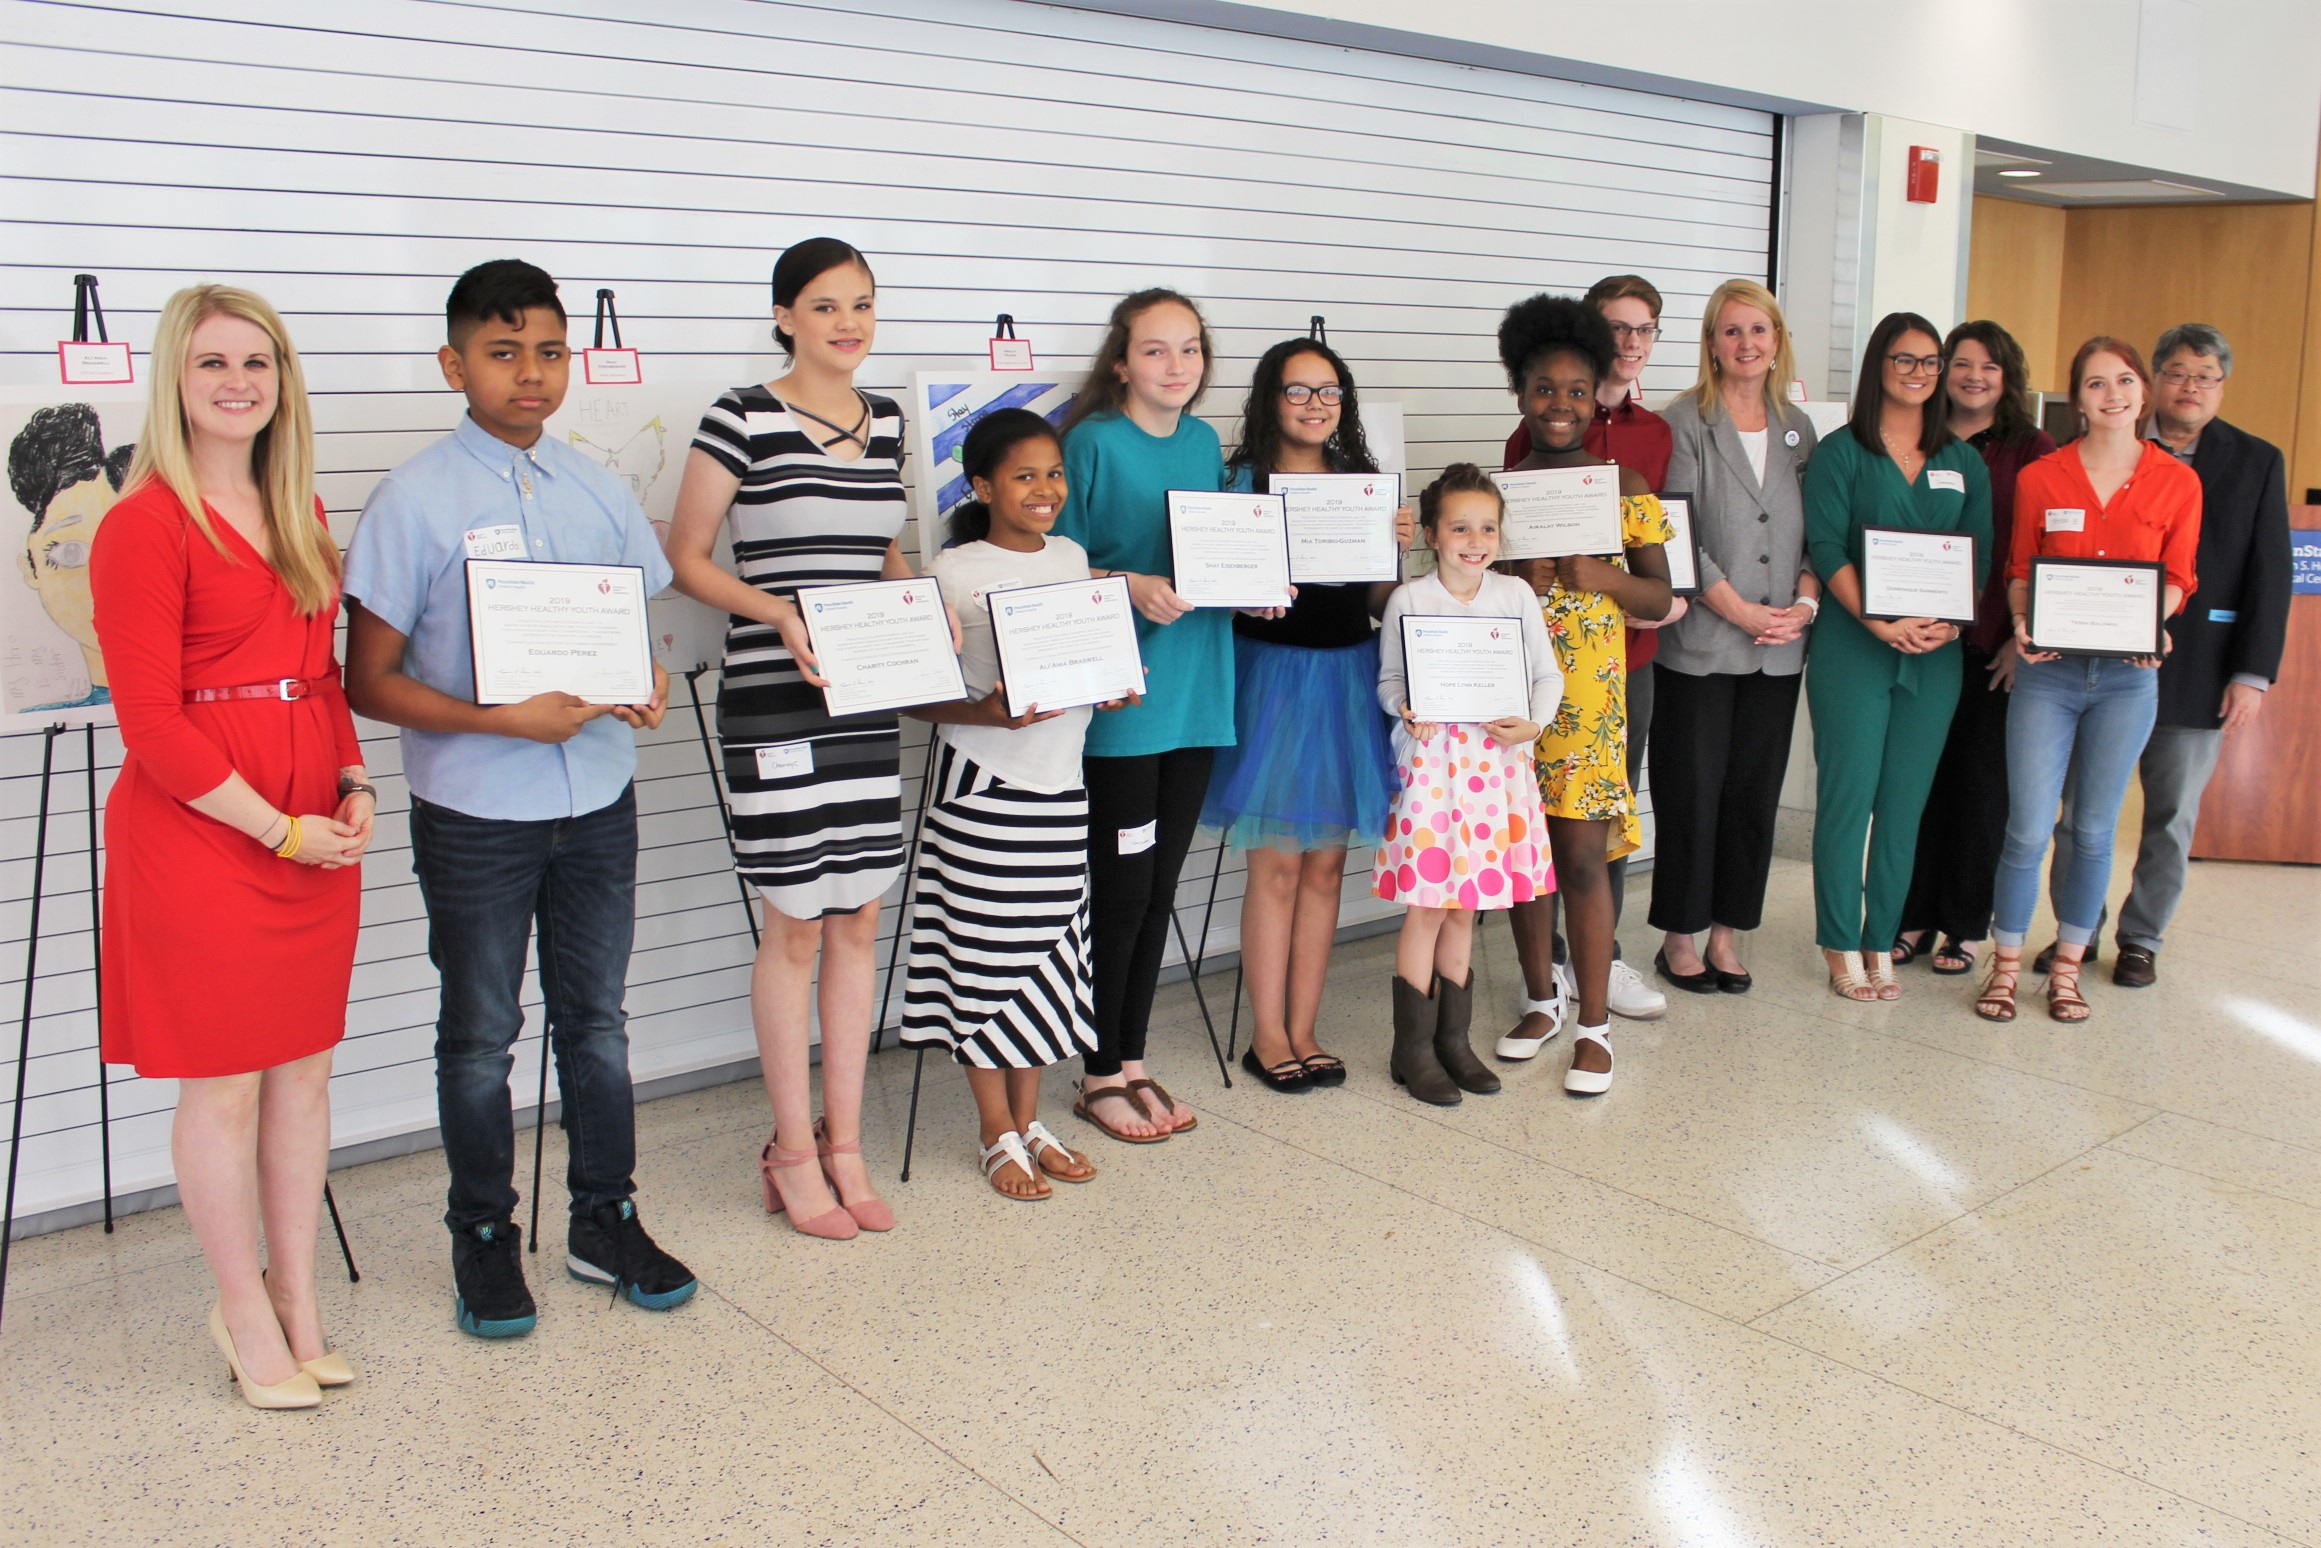 Fourteen people – 10 children and 4 adults – stand in a row to pose for a photo, all of them smiling. Each child holds an award certificate.